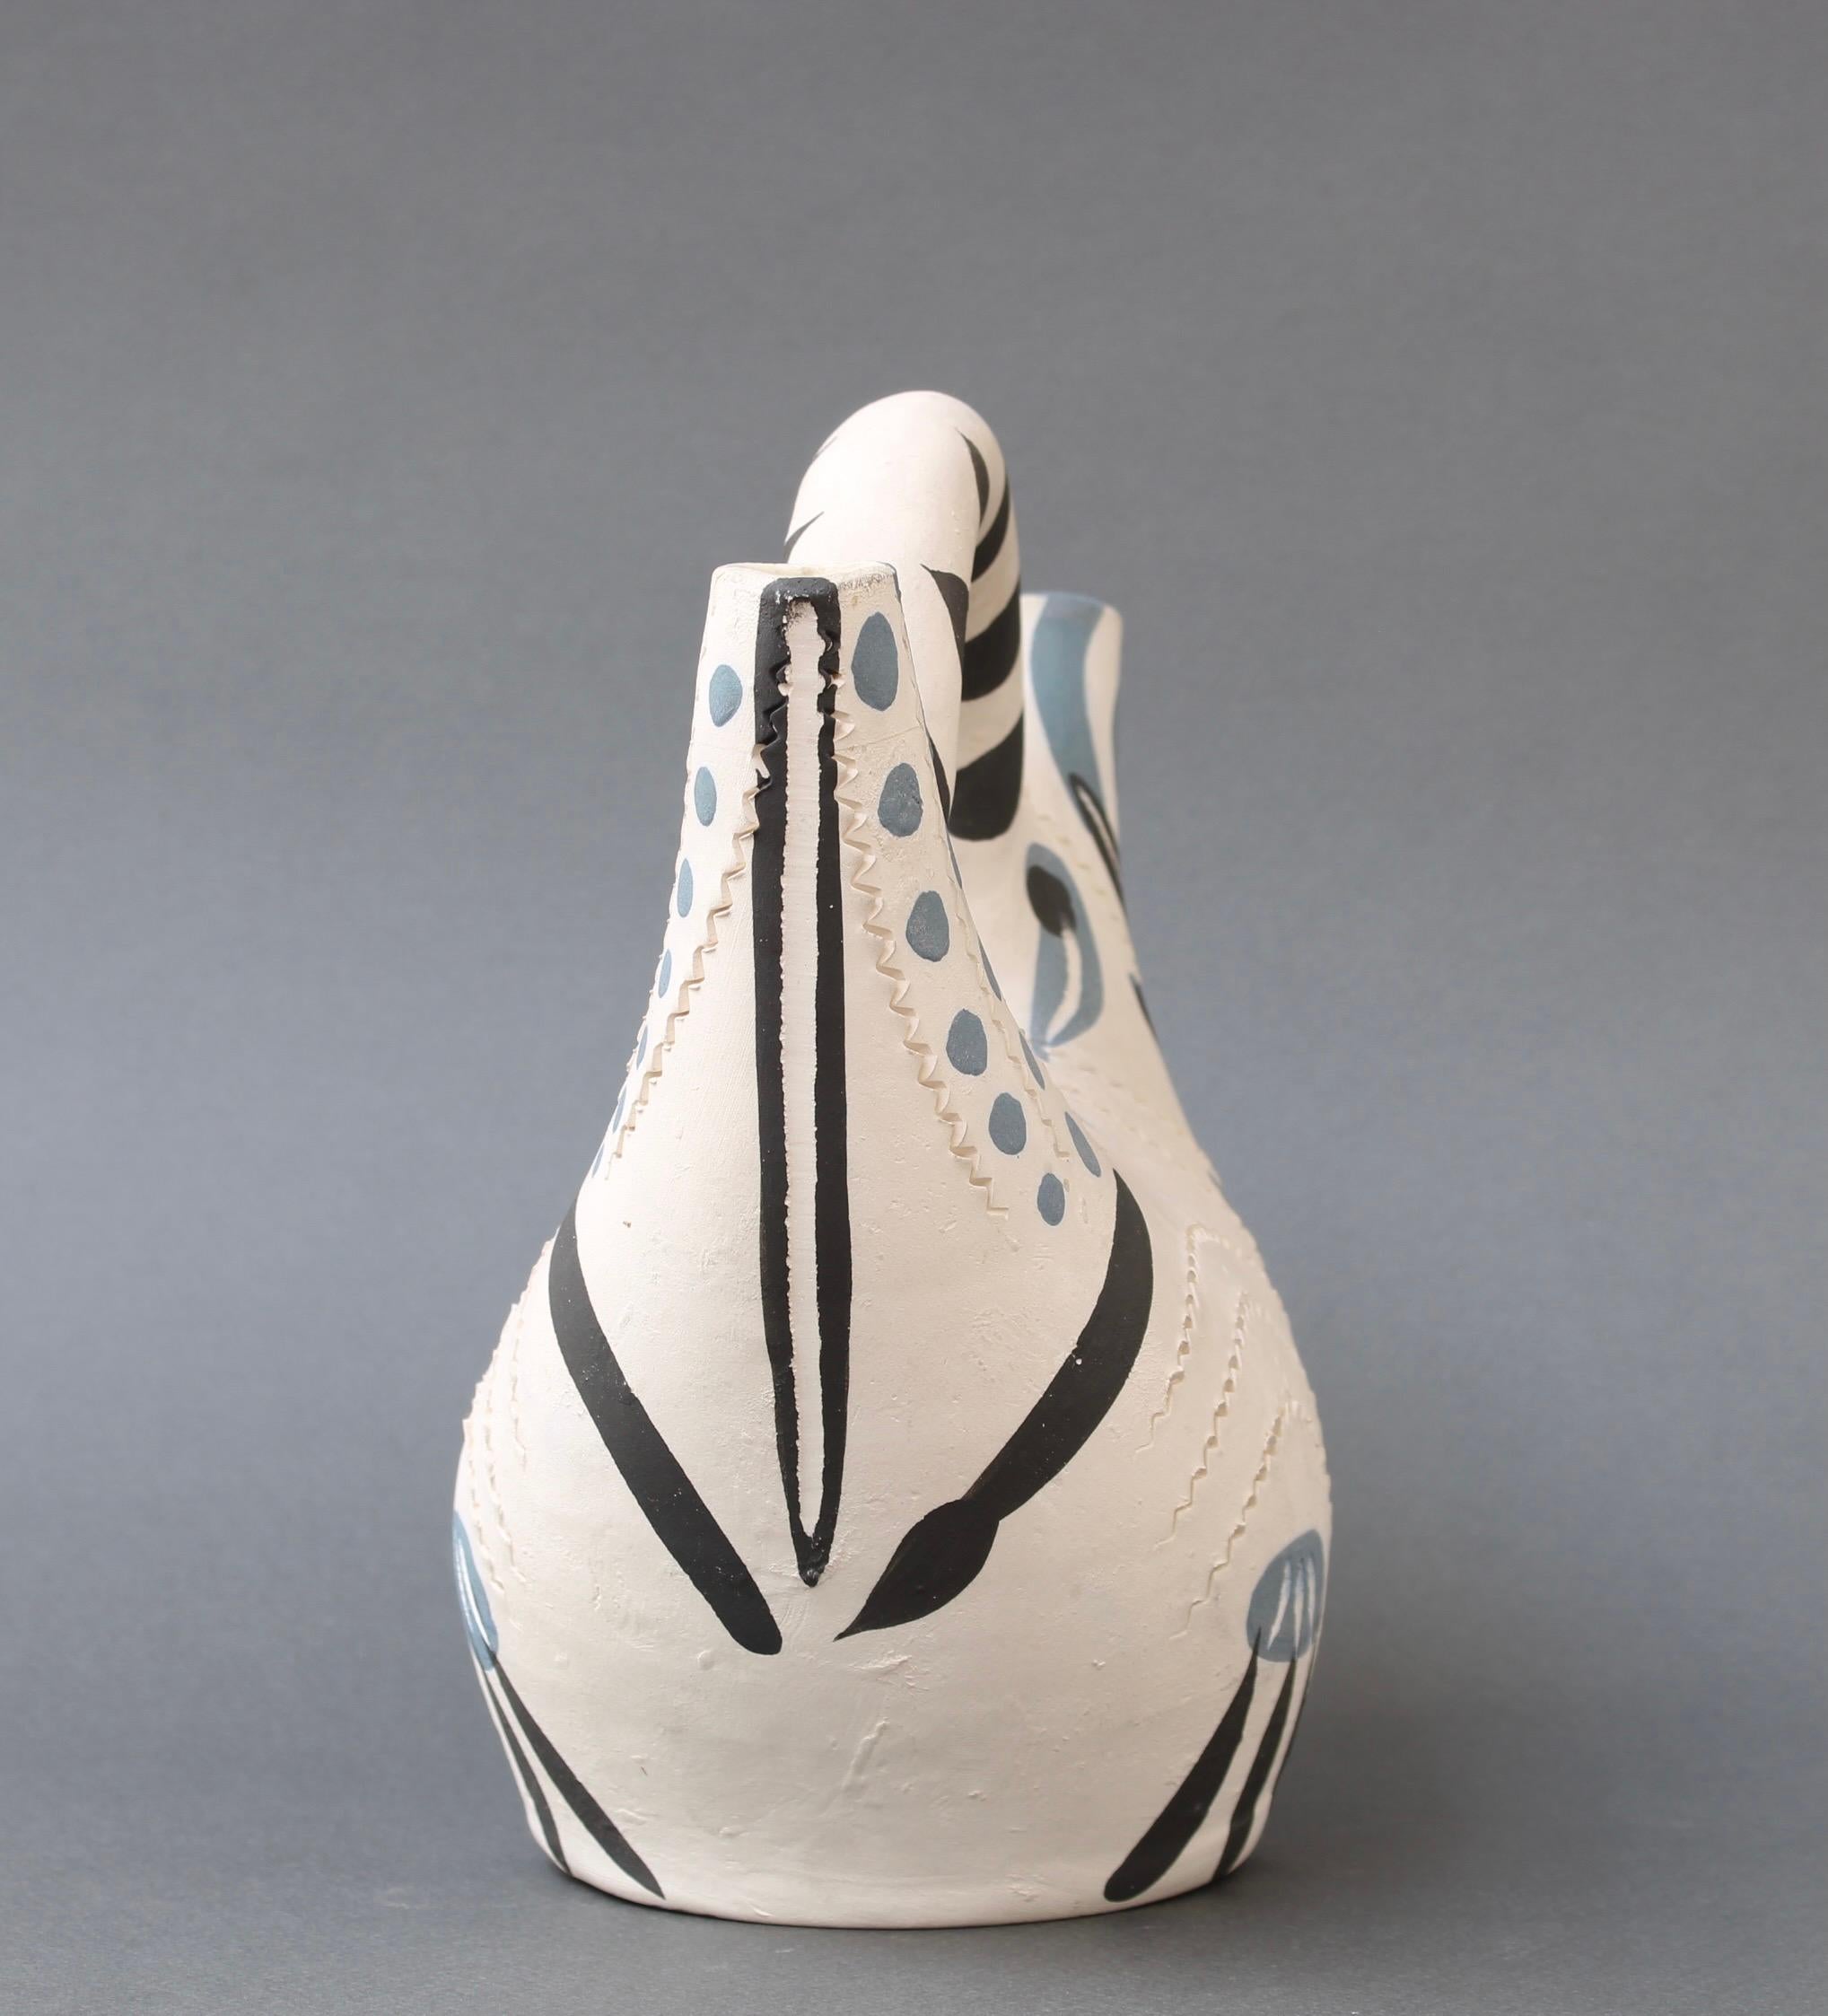 Modern 'Pichet Espagnol' from the Madoura Pottery 'AR 245' by Pablo Picasso '1954' For Sale